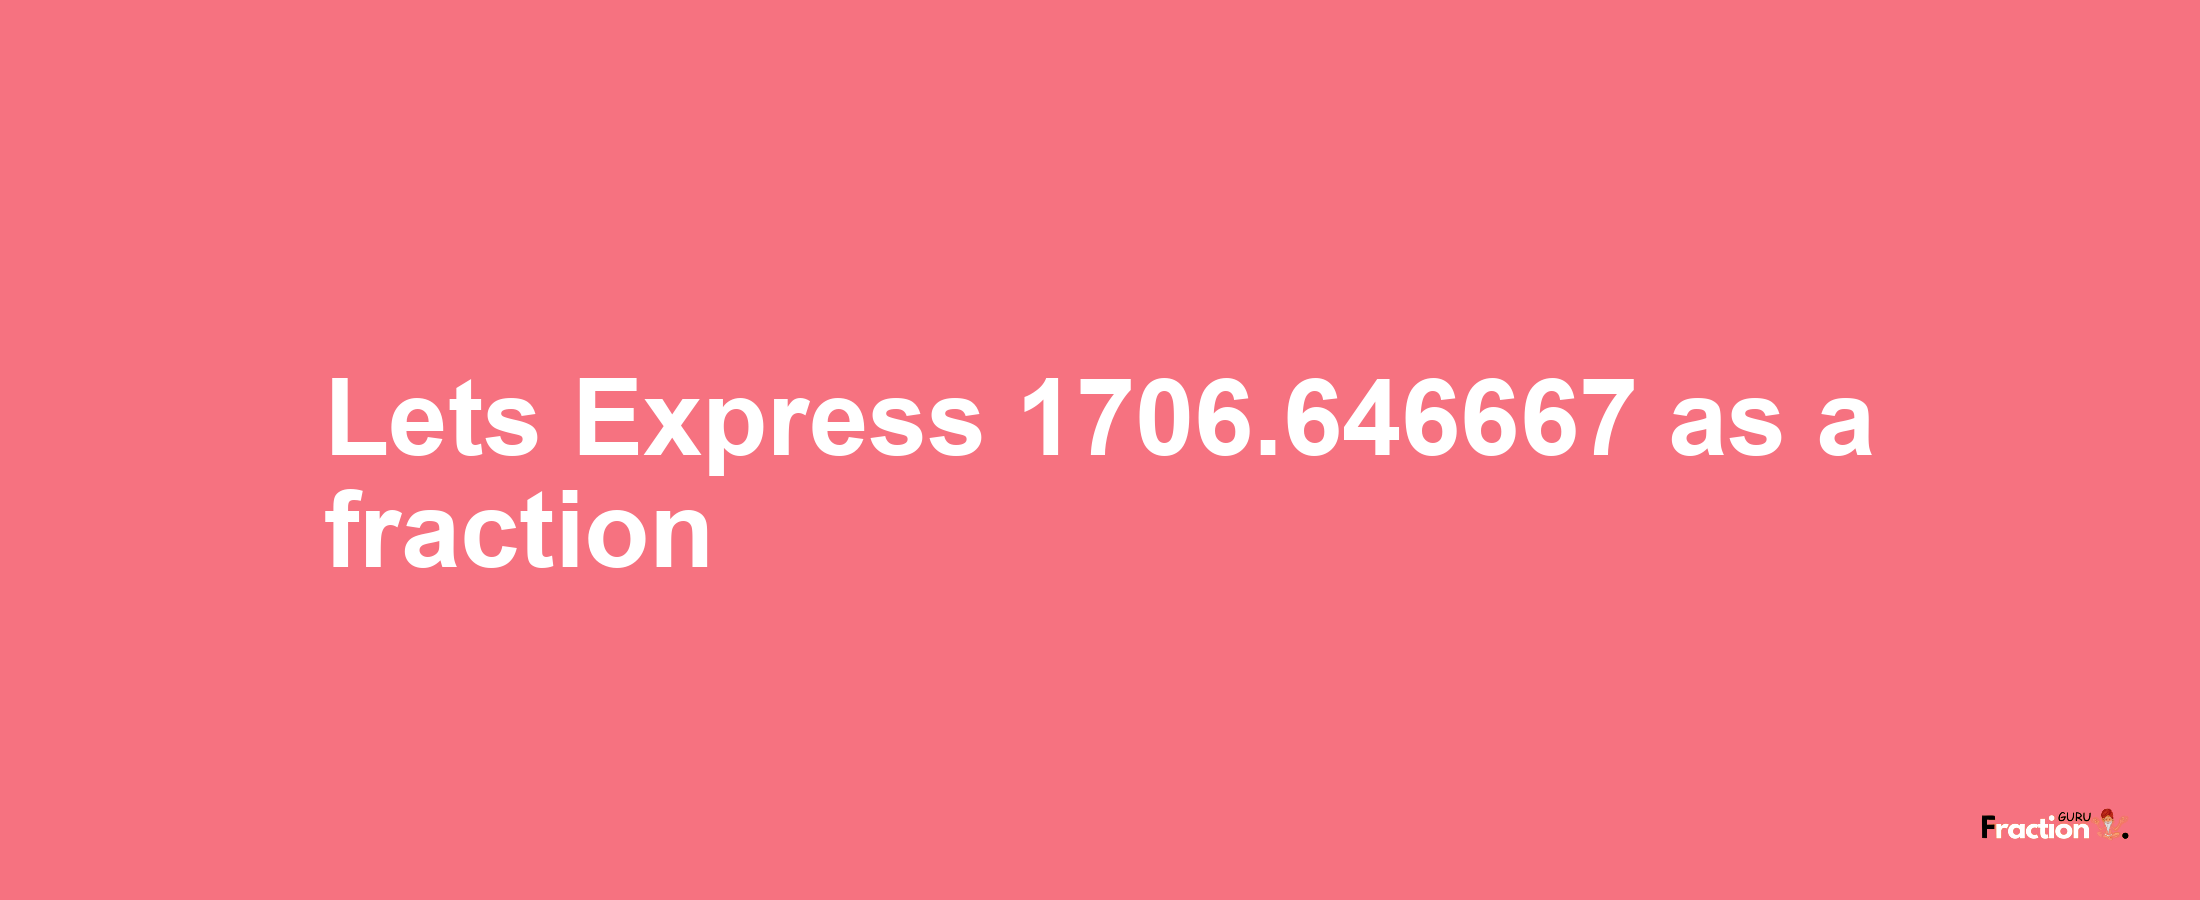 Lets Express 1706.646667 as afraction